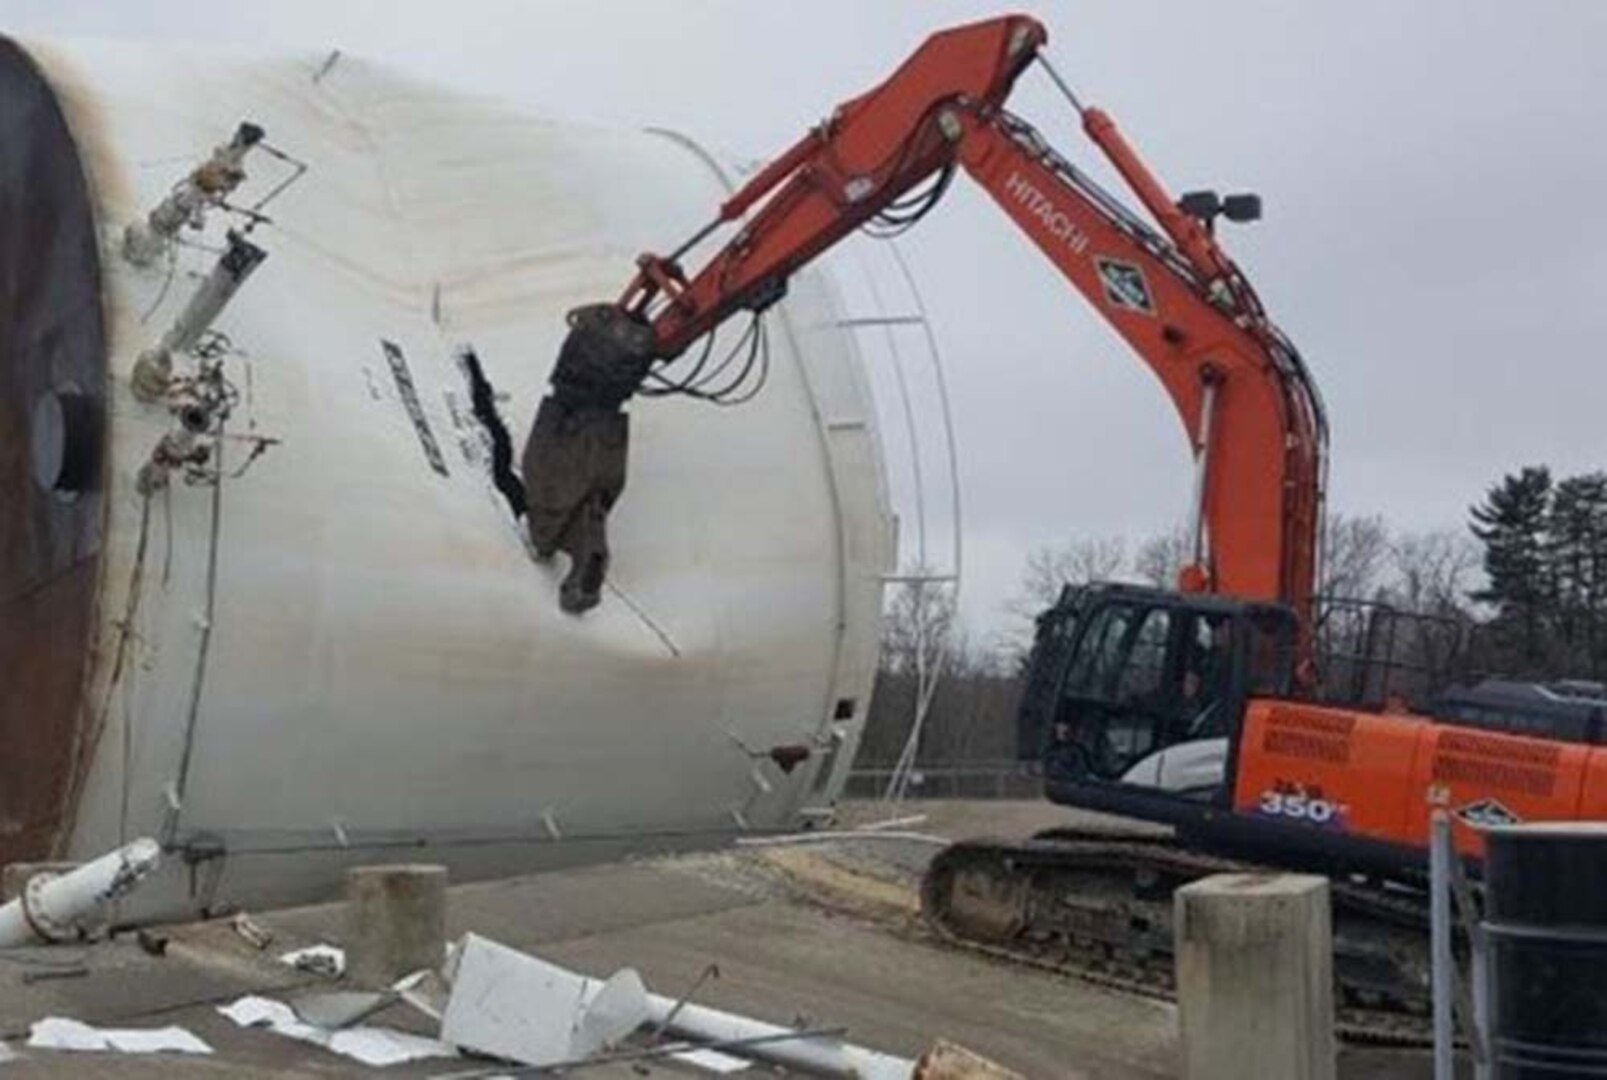 Construction equipment tears through the steel of a fuel tank.